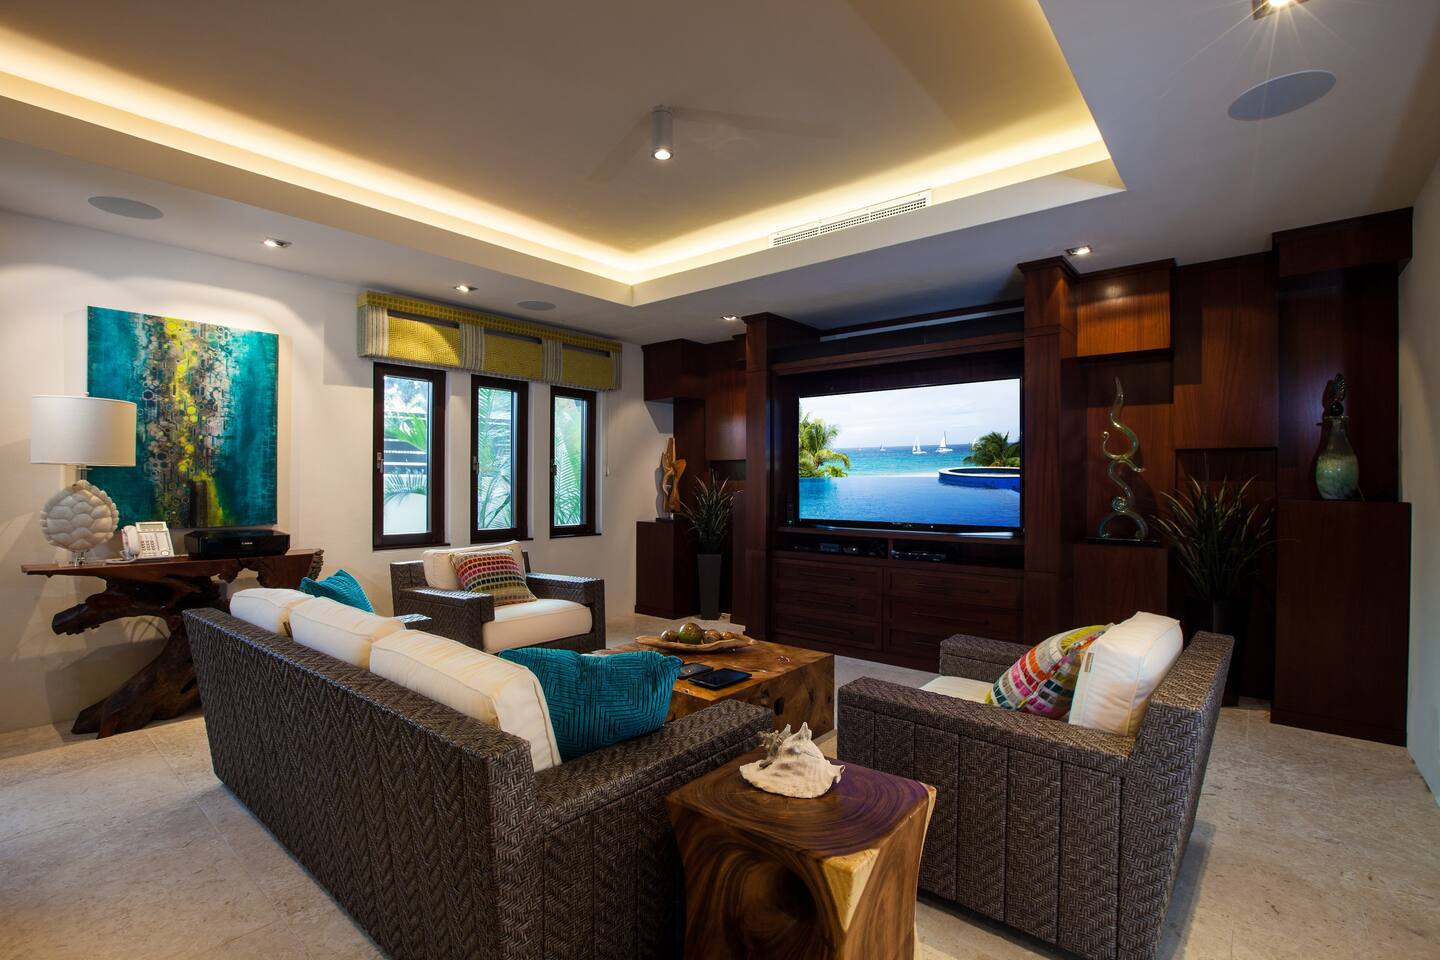 media lounge designed for relaxation and entertainment, furnished with plush seating options such as cozy armchairs.